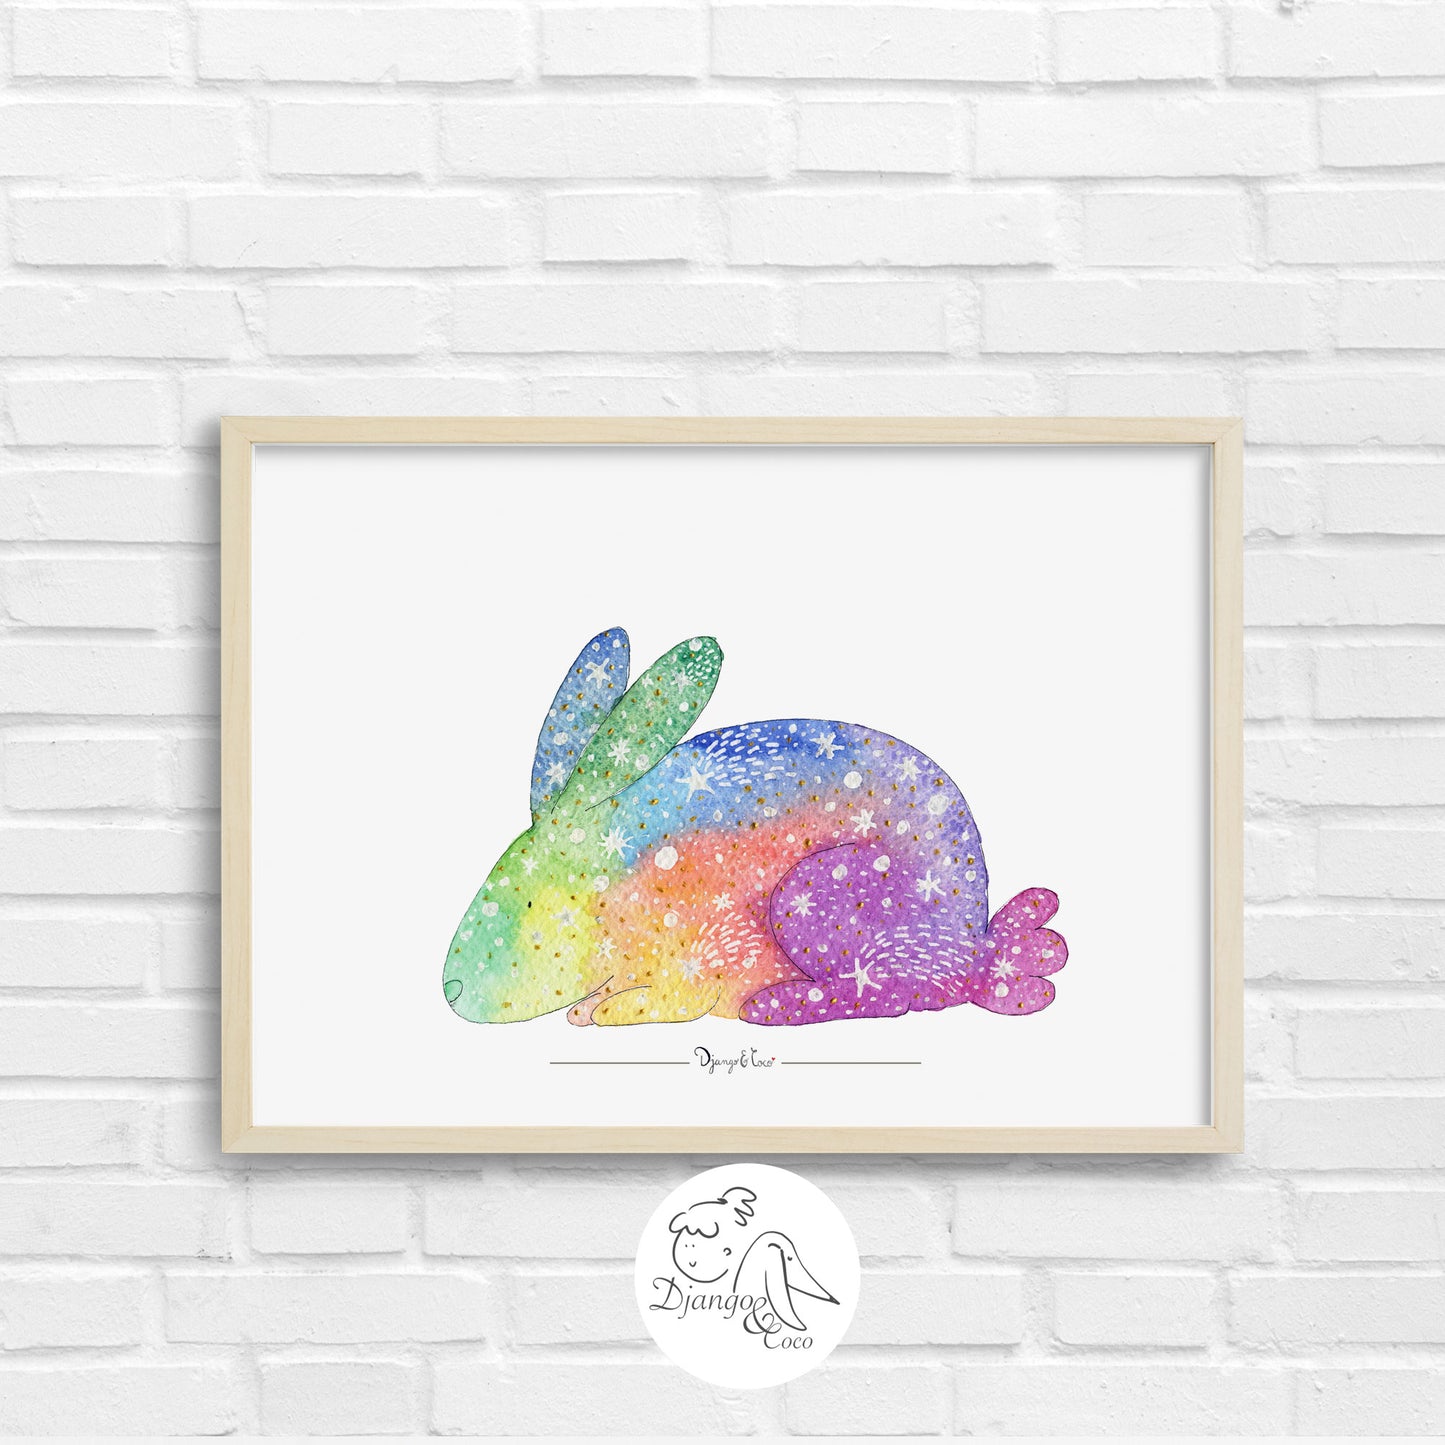 framed art of a colorful rabbit